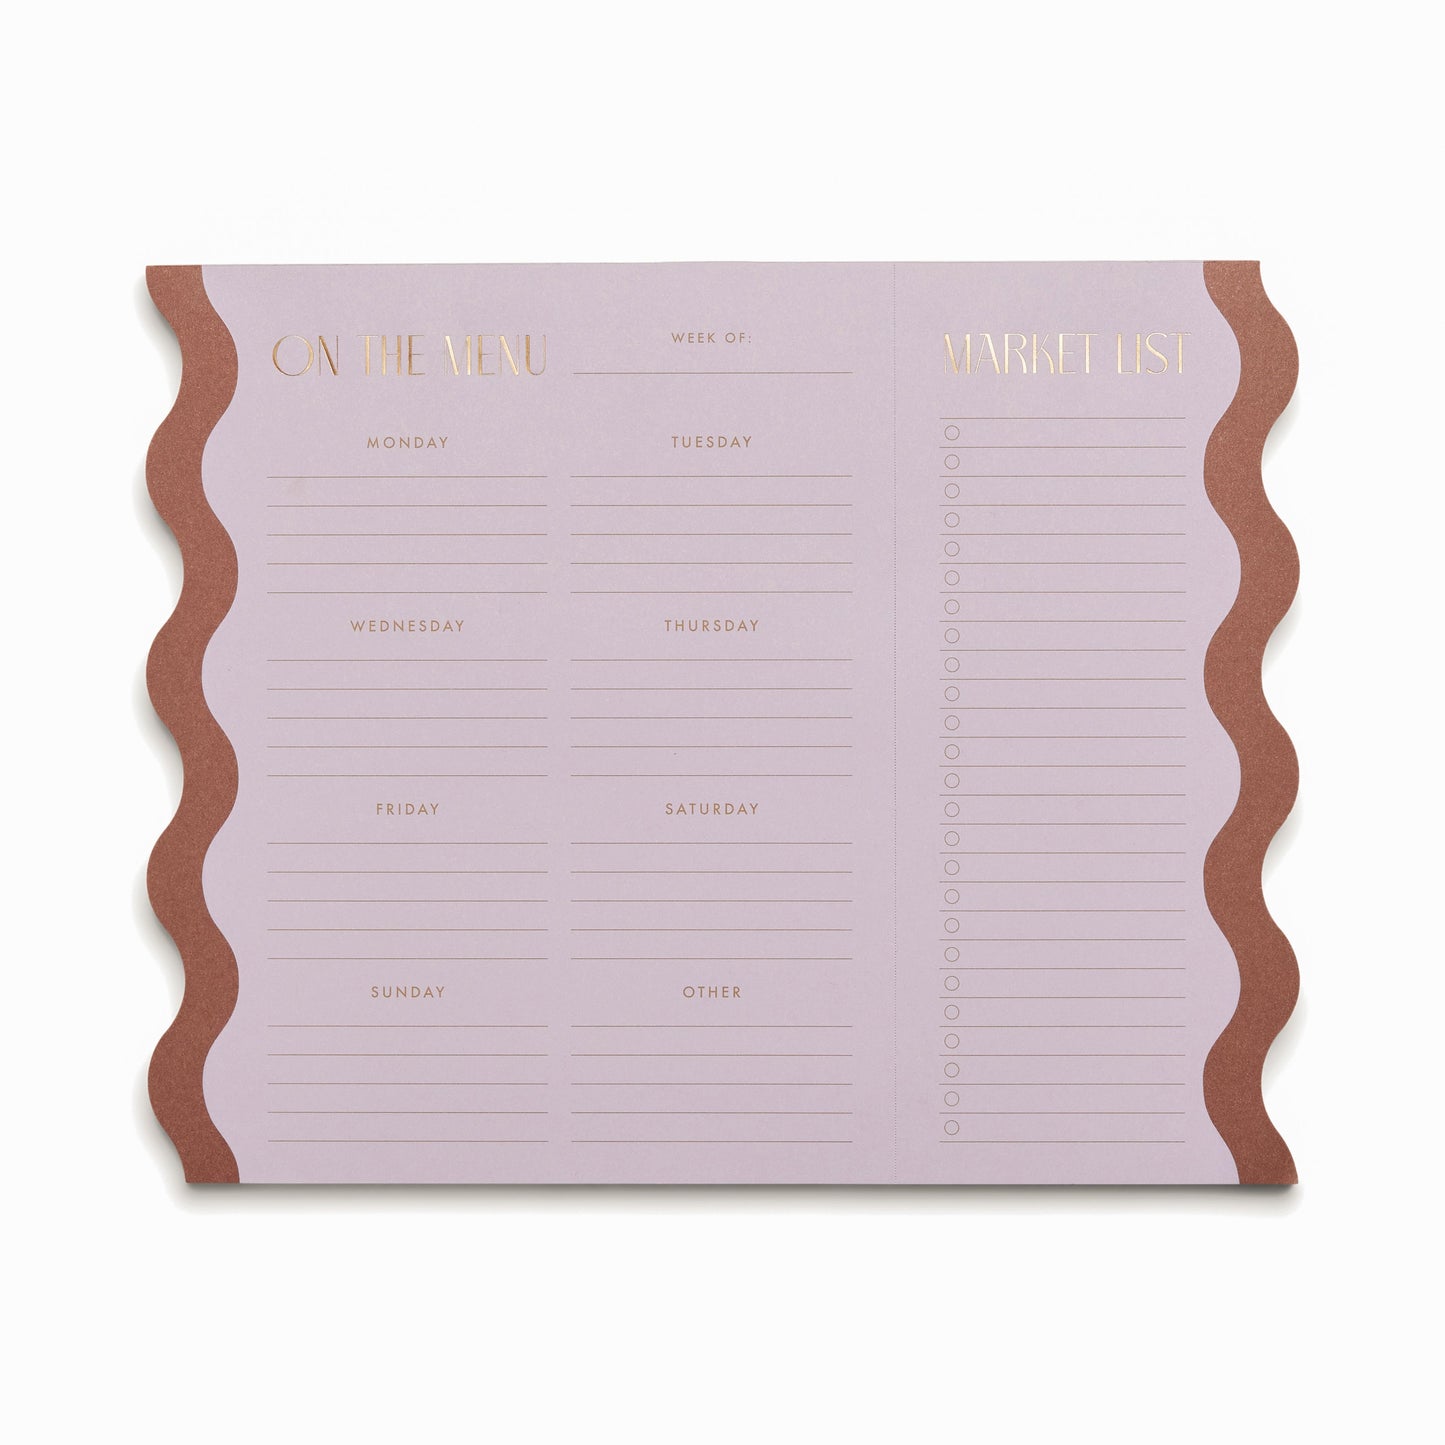 Meal Planner Notepad with Magnets - Lilac & Nutmeg